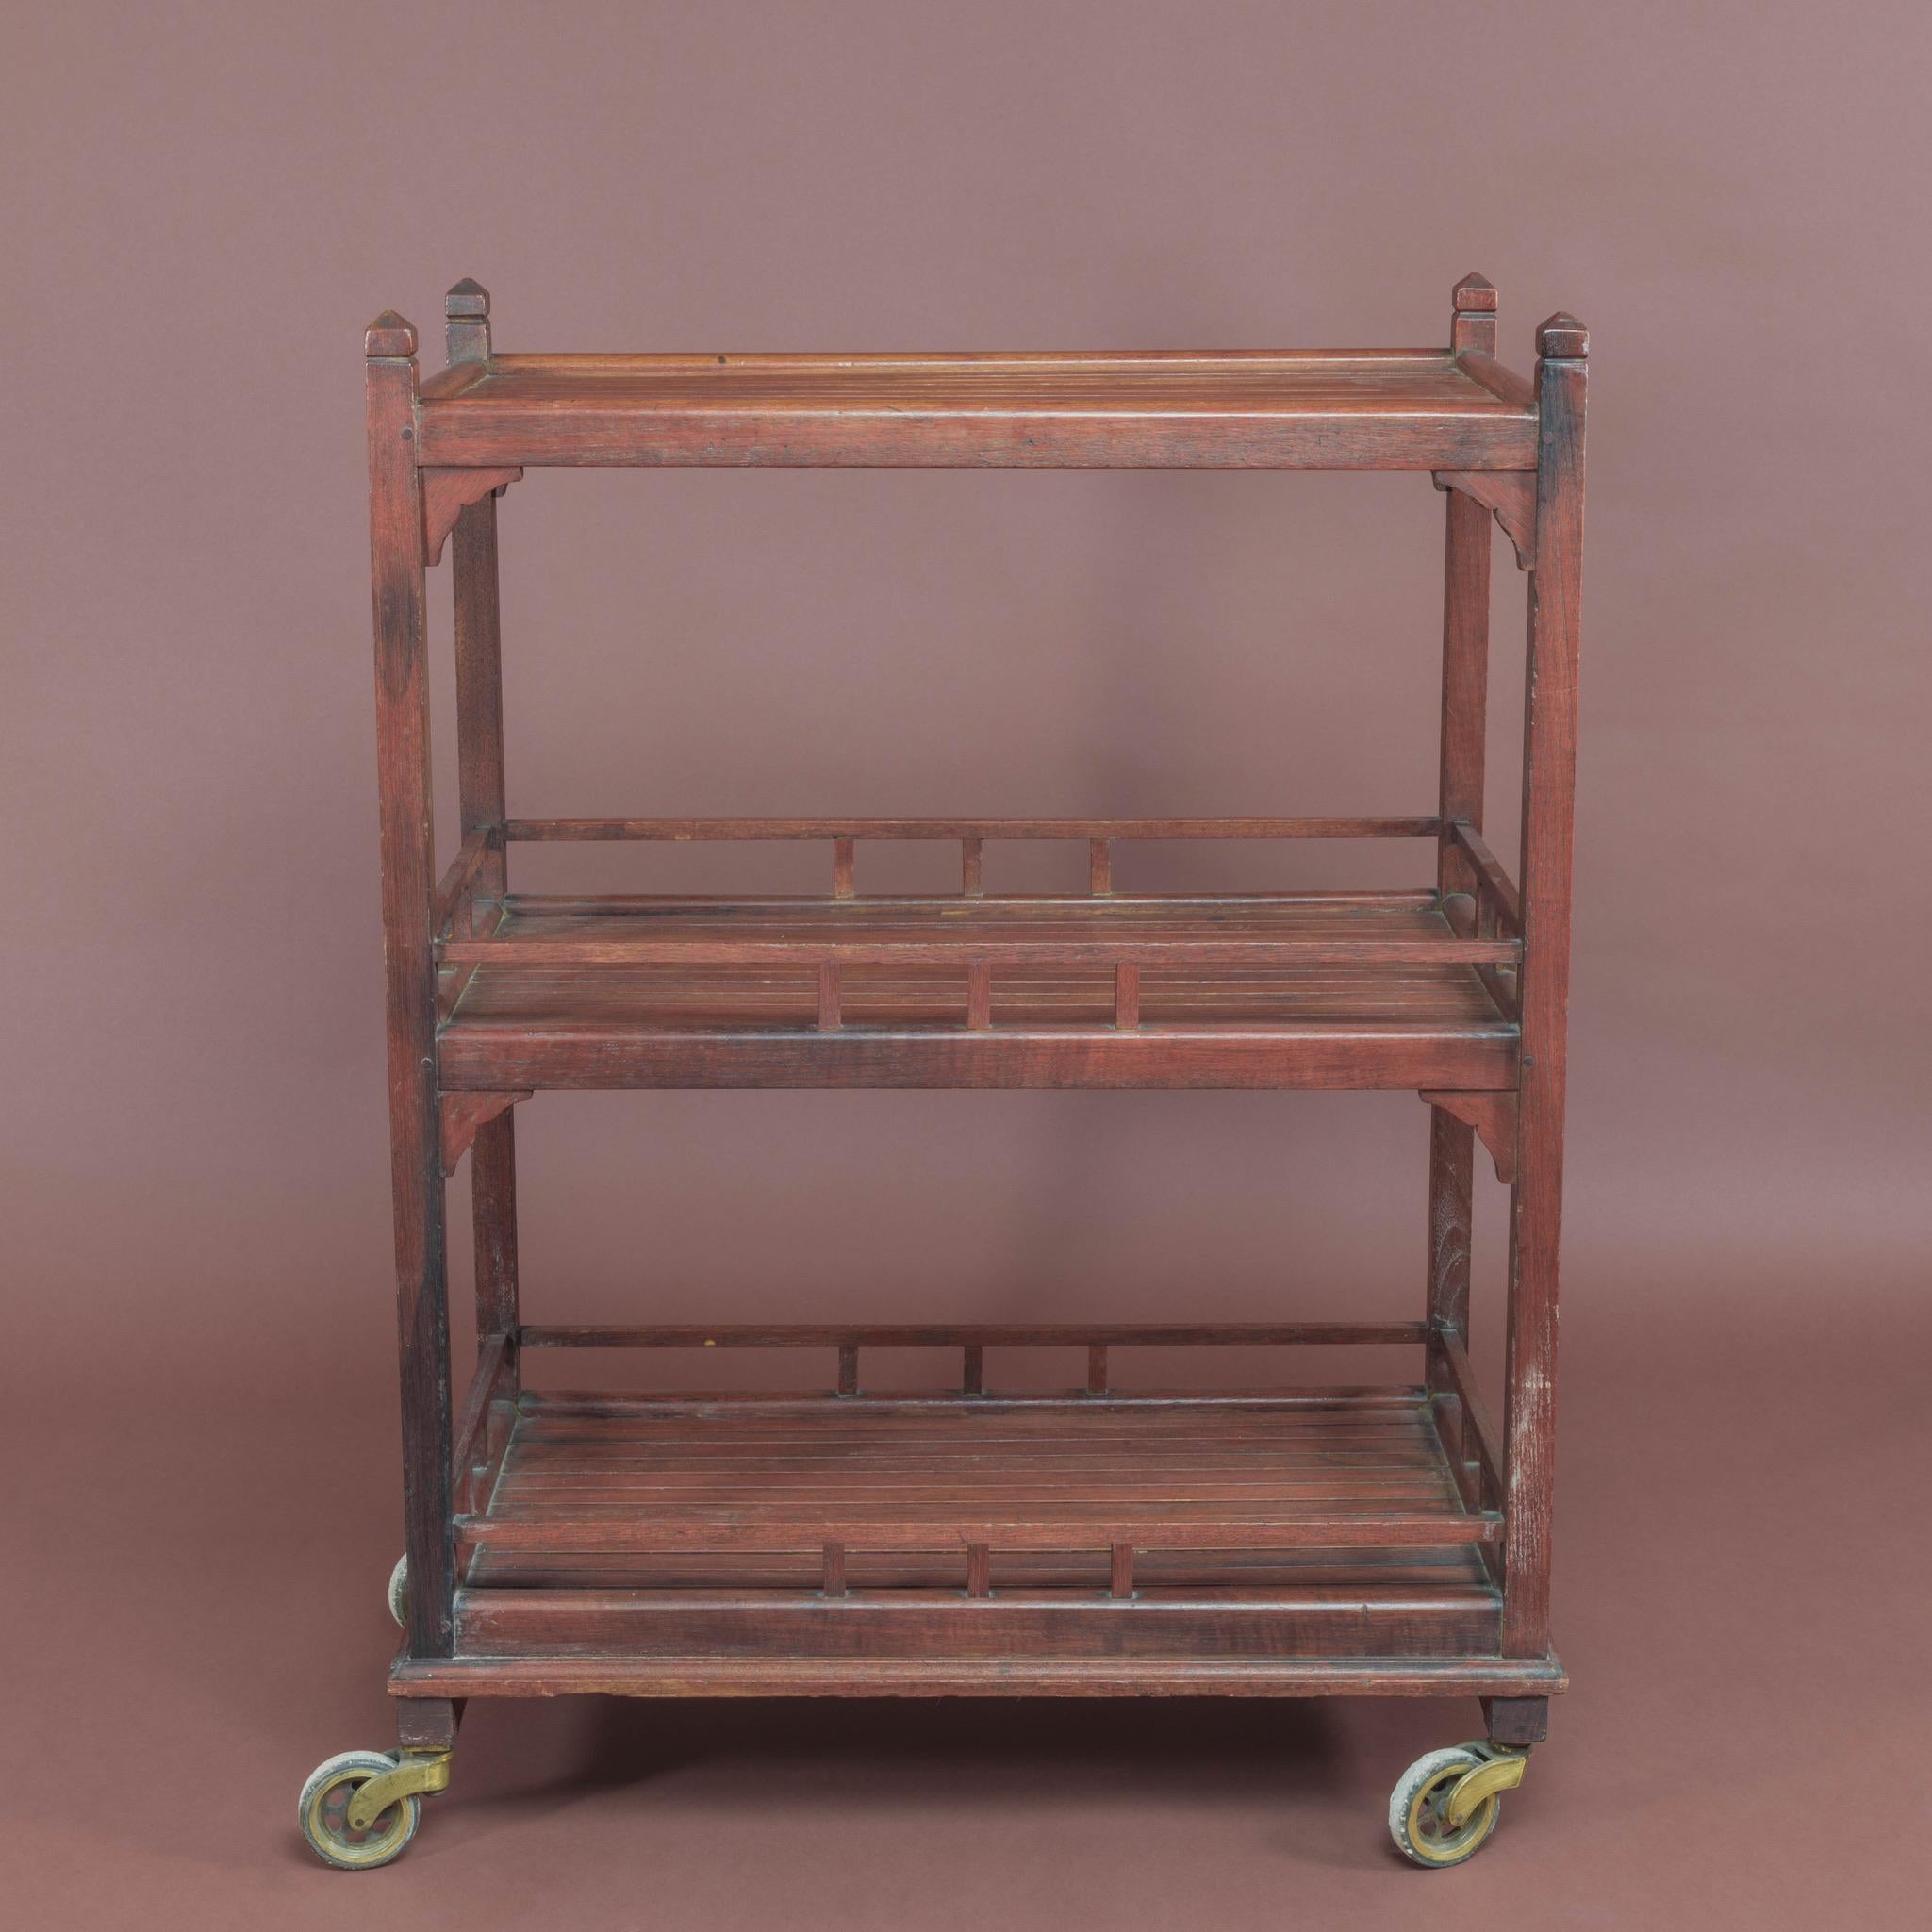 Wooden slatted garden trolley by Hughes, Bolckow & Co. Ltd. who were battleship breakers based at Battleship Wharf, Blyth, Northumberland. The company stripped the redundant ships and made furniture from the timbers of Britain’s old Battleships plus